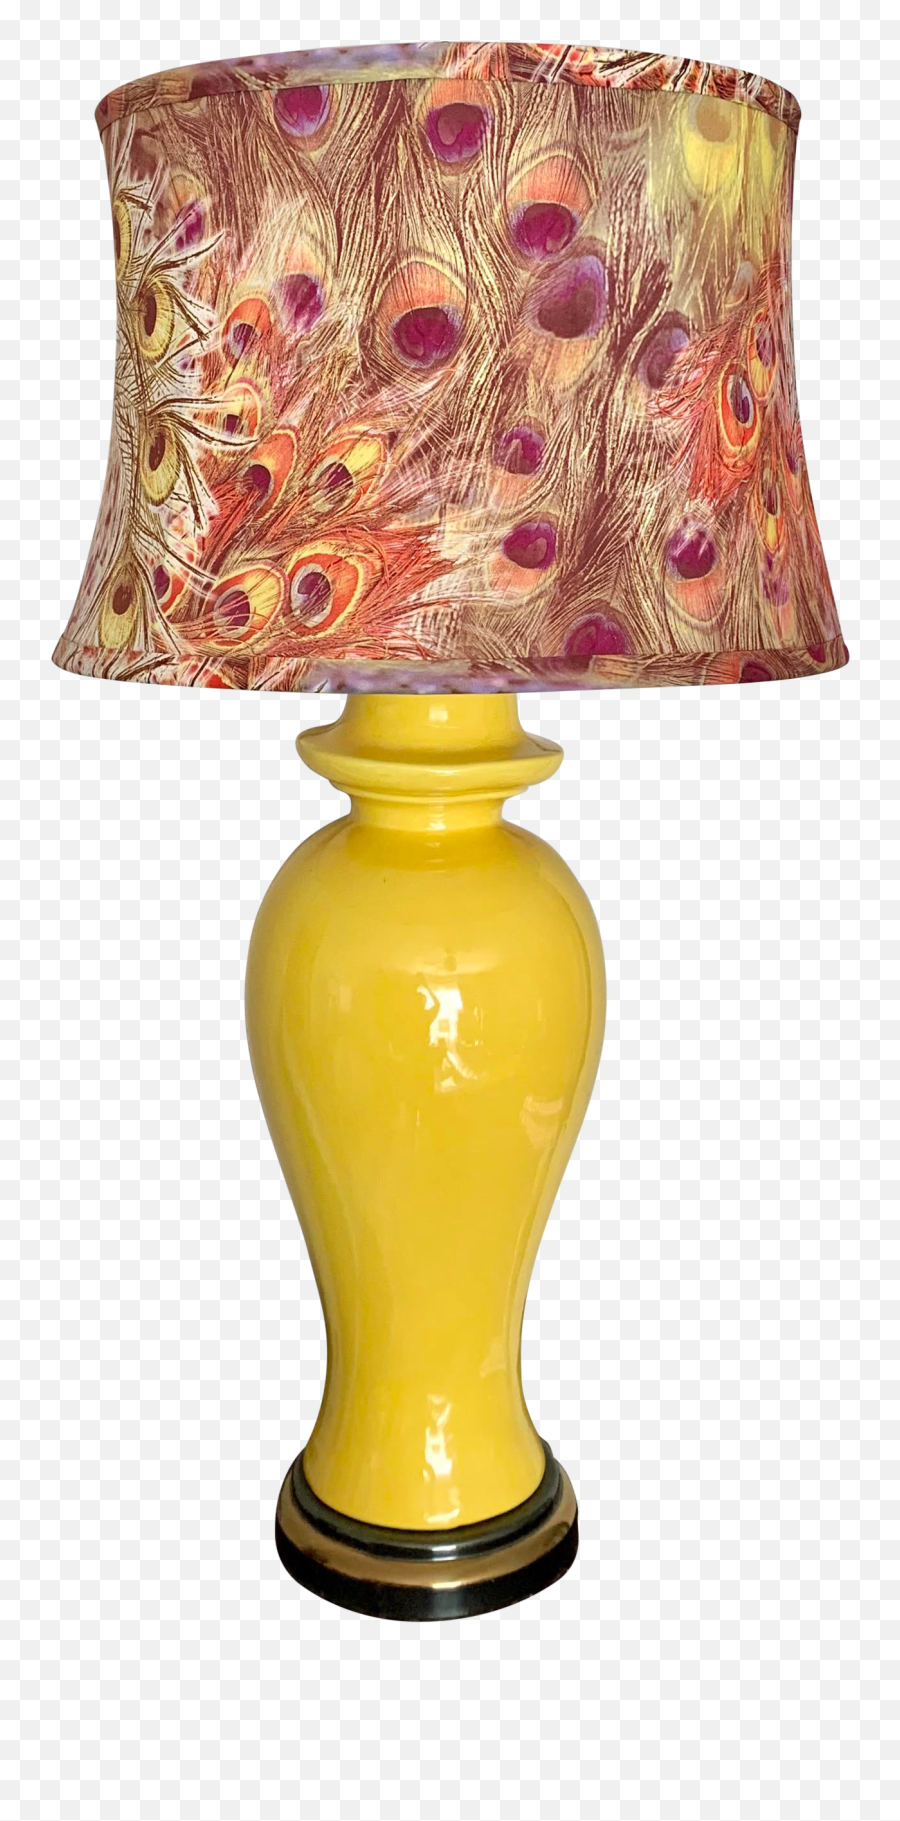 Yellow Vintage Ginger Jar Lamp With Peacock Feather Print Shade - Desk Lamp Emoji,Peacock Feather Ascii Emoticon